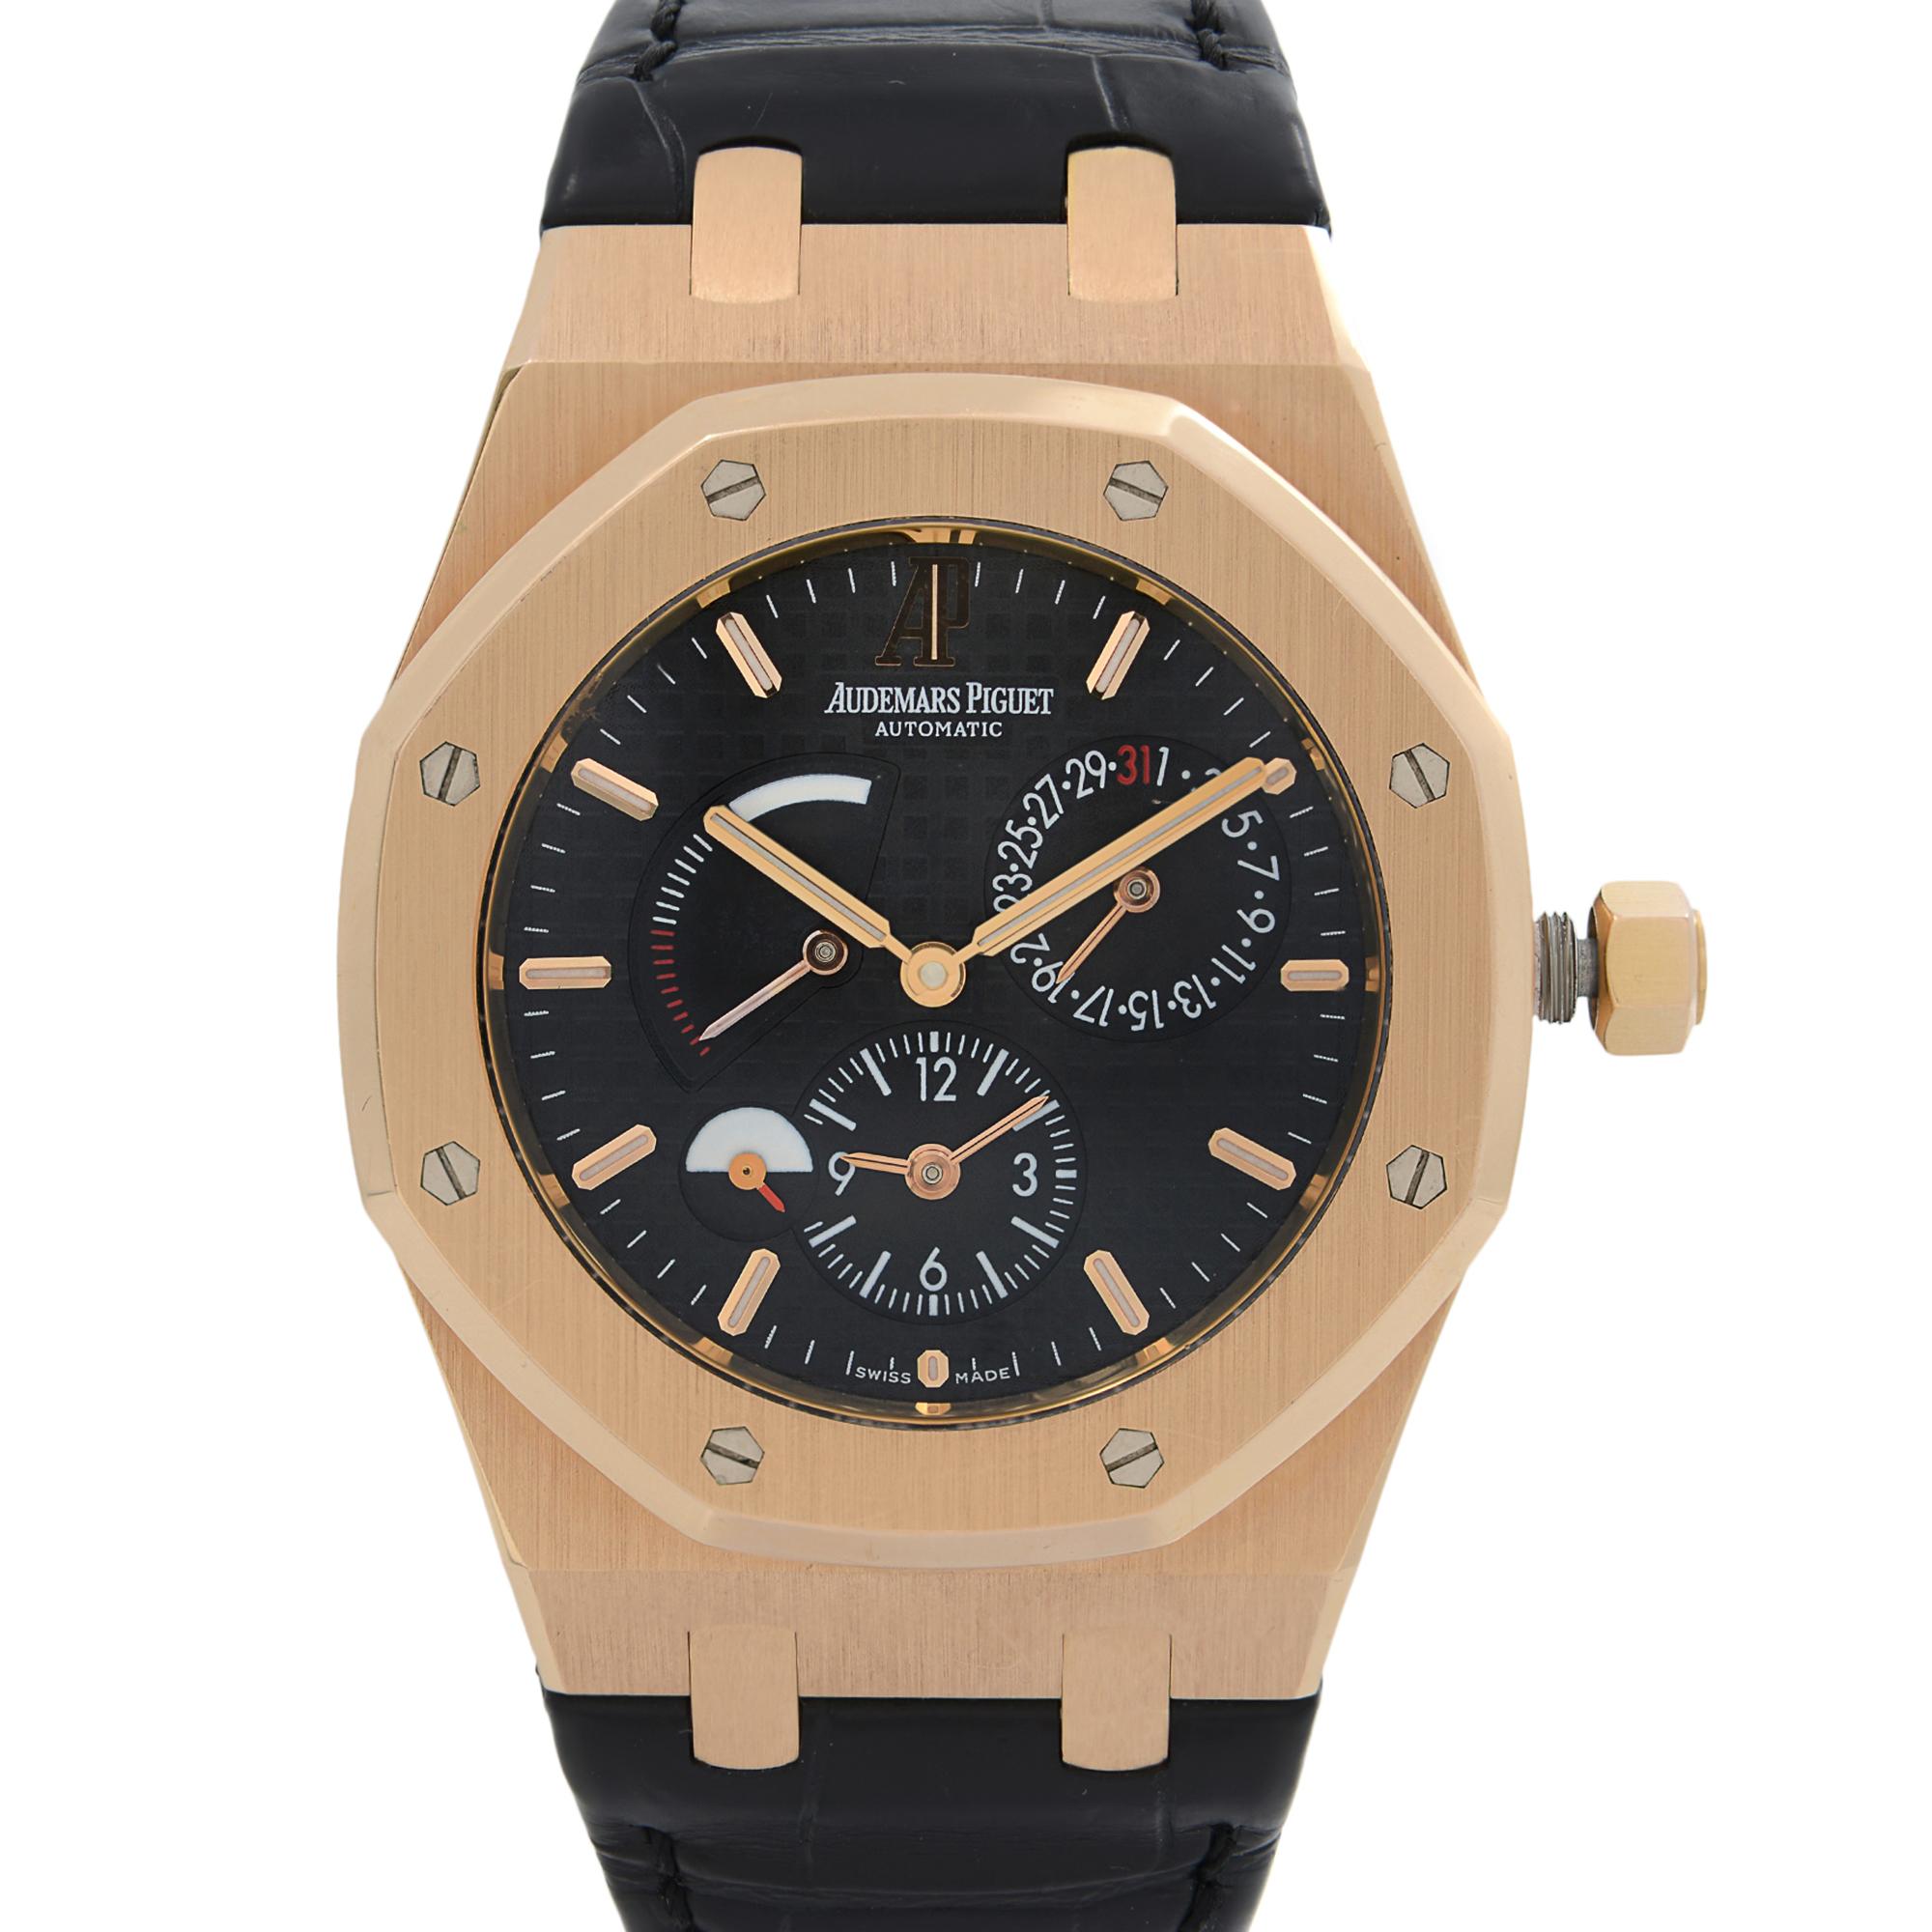 Pre Owned Audemars Piguet Royal Oak 18k Rose Gold Dual Tome Men Watch 26120OR.OO.D002CR.01. G- Series. The watch was produced between 2008-2010. This Beautiful Timepiece is Powered by Mechanical (Automatic) Movement And Features: 18k Rose Gold Case